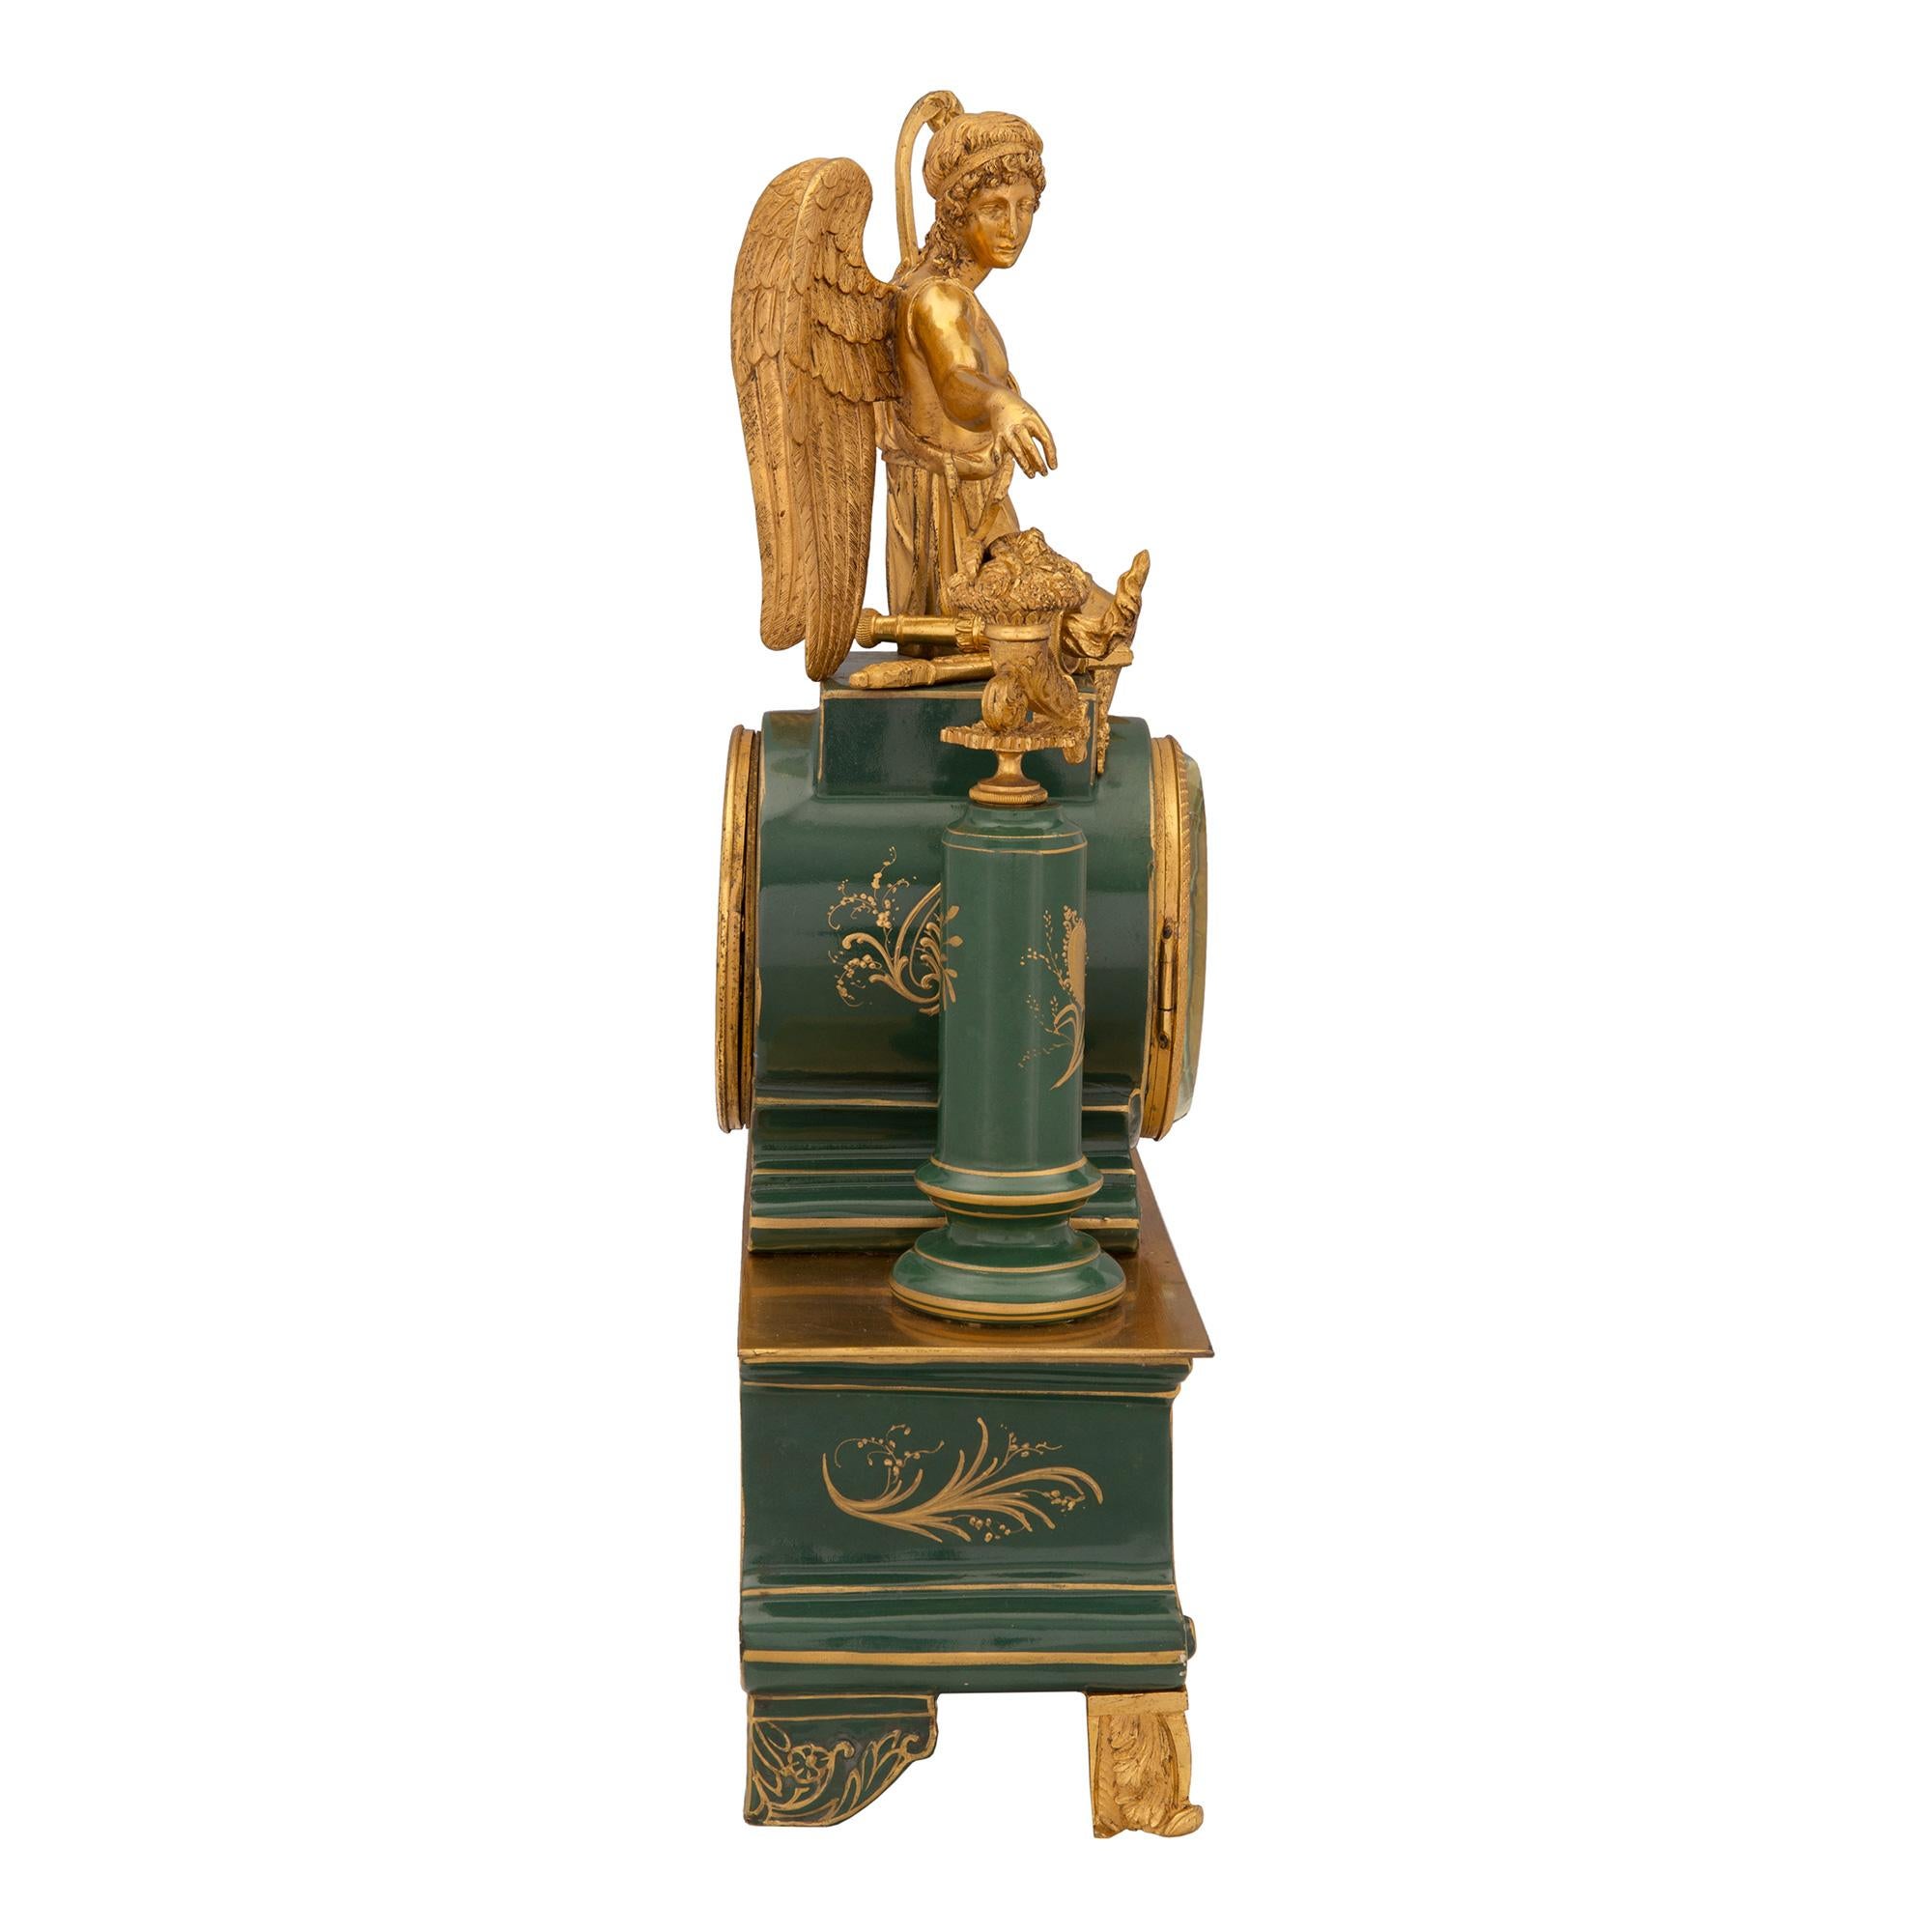 A most attractive French 19th century neo-classical st. porcelain and ormolu clock. The clock is raised by fine scrolled ormolu feet below the beautiful deep forest green porcelain base. The base is centered by a lovely and most charming hand